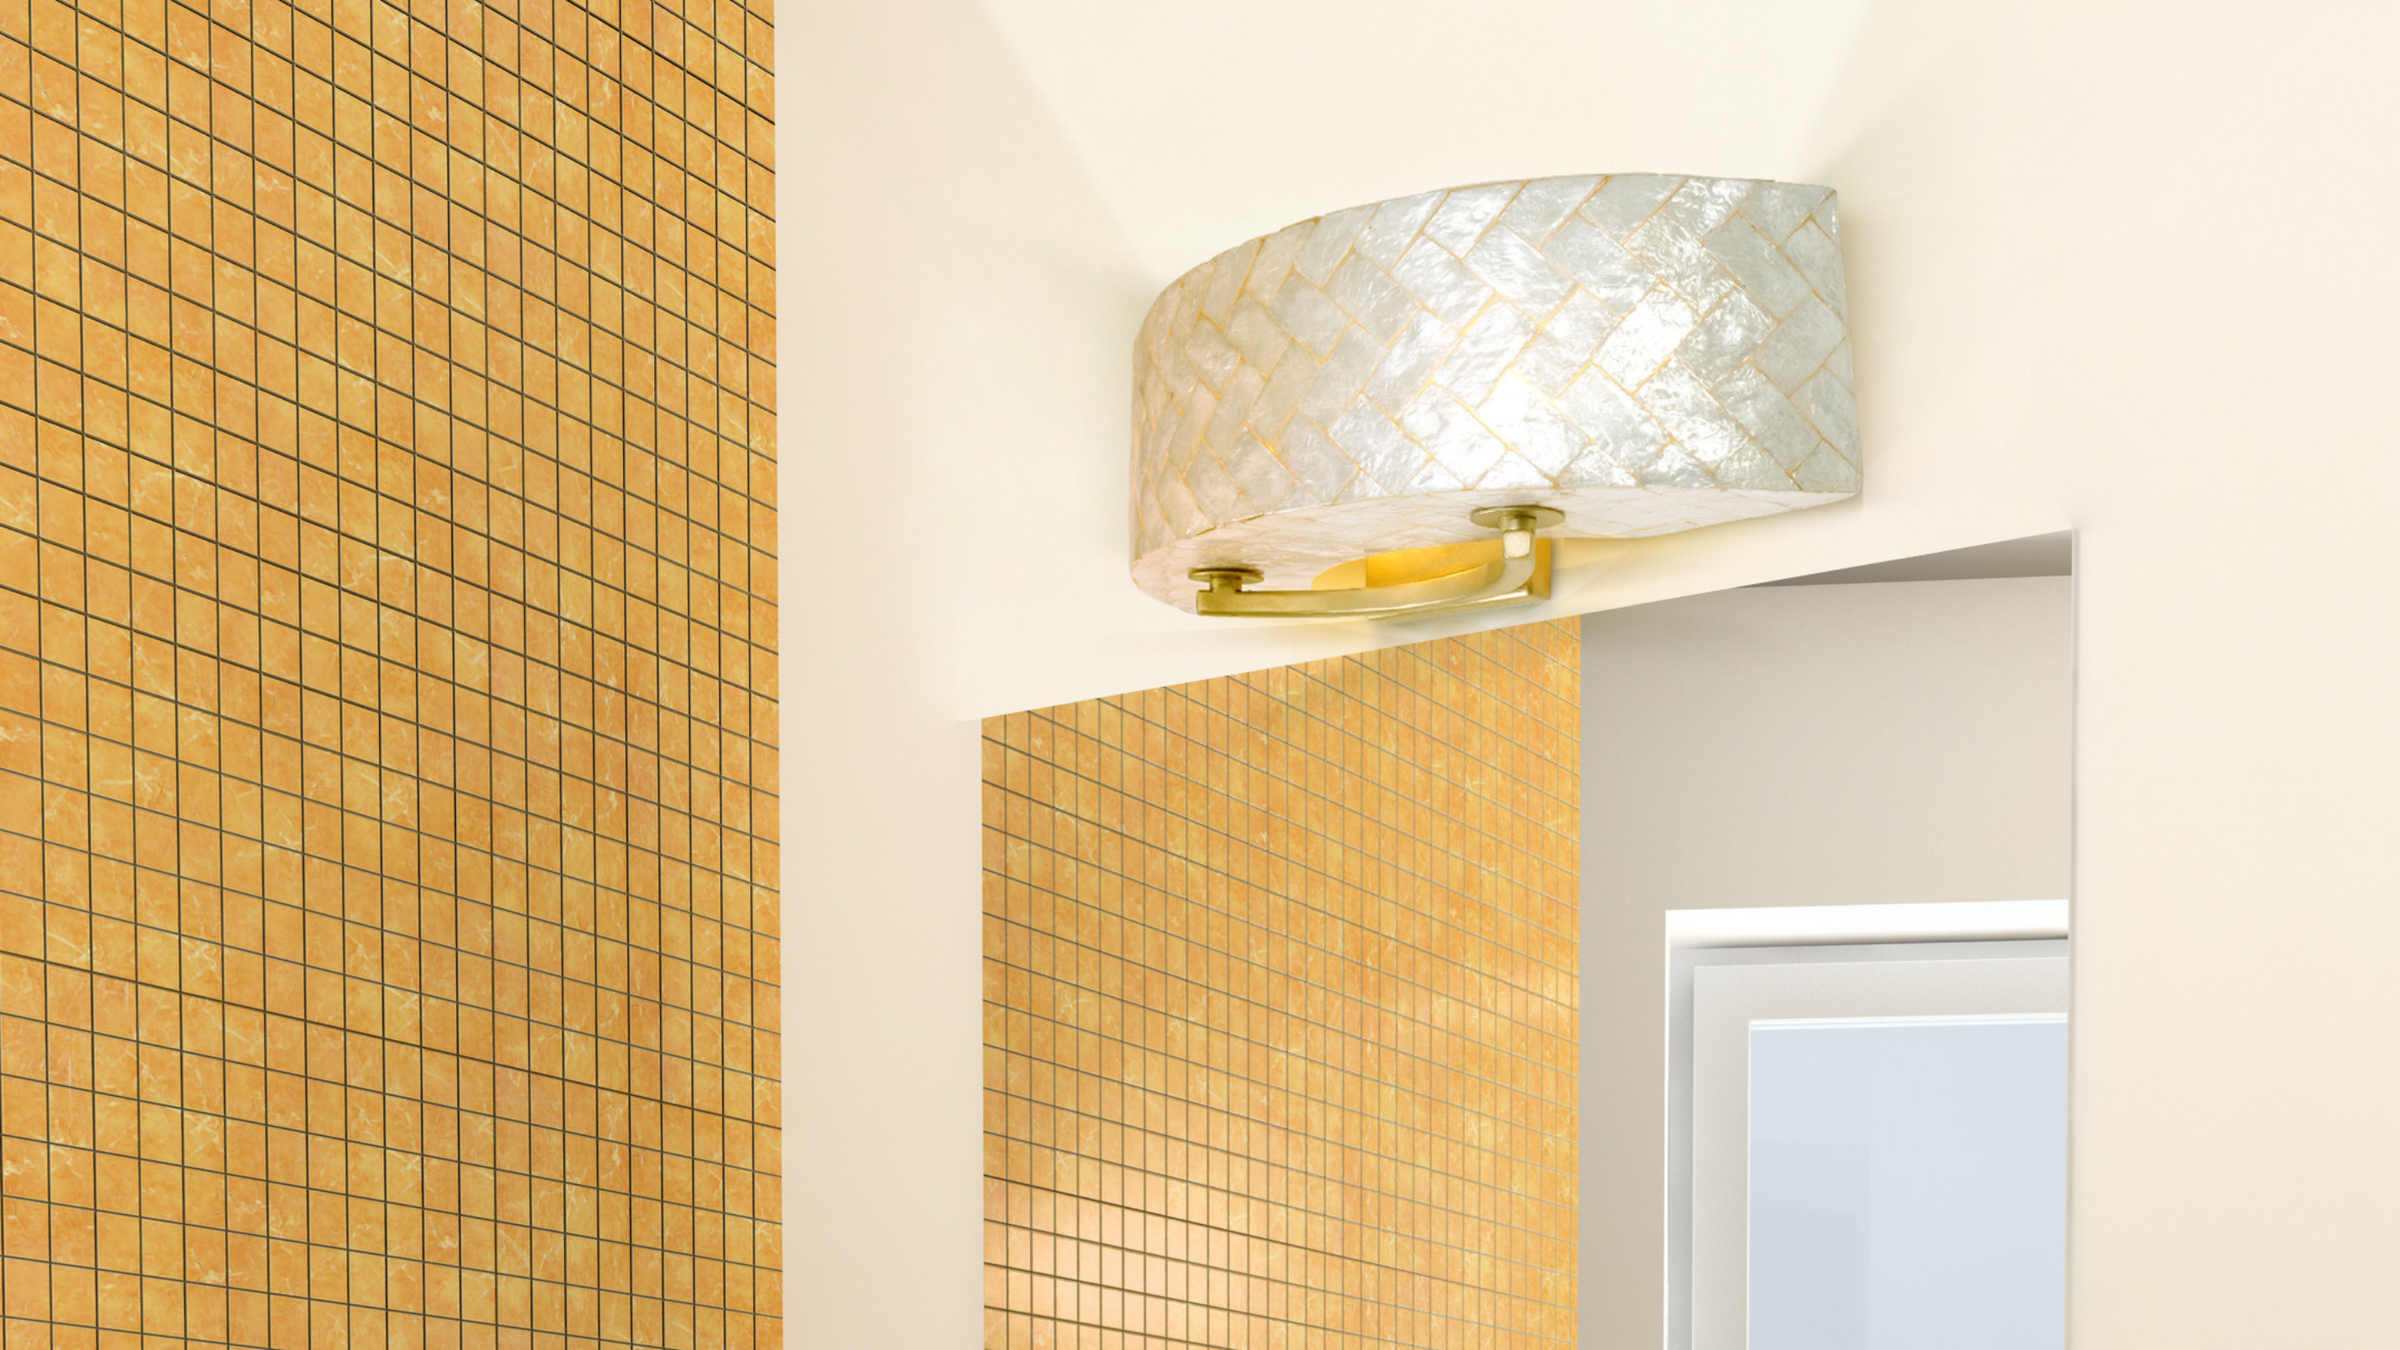 Radius Shell bath fixture shown hunt over mirror next to a yellow tile wall